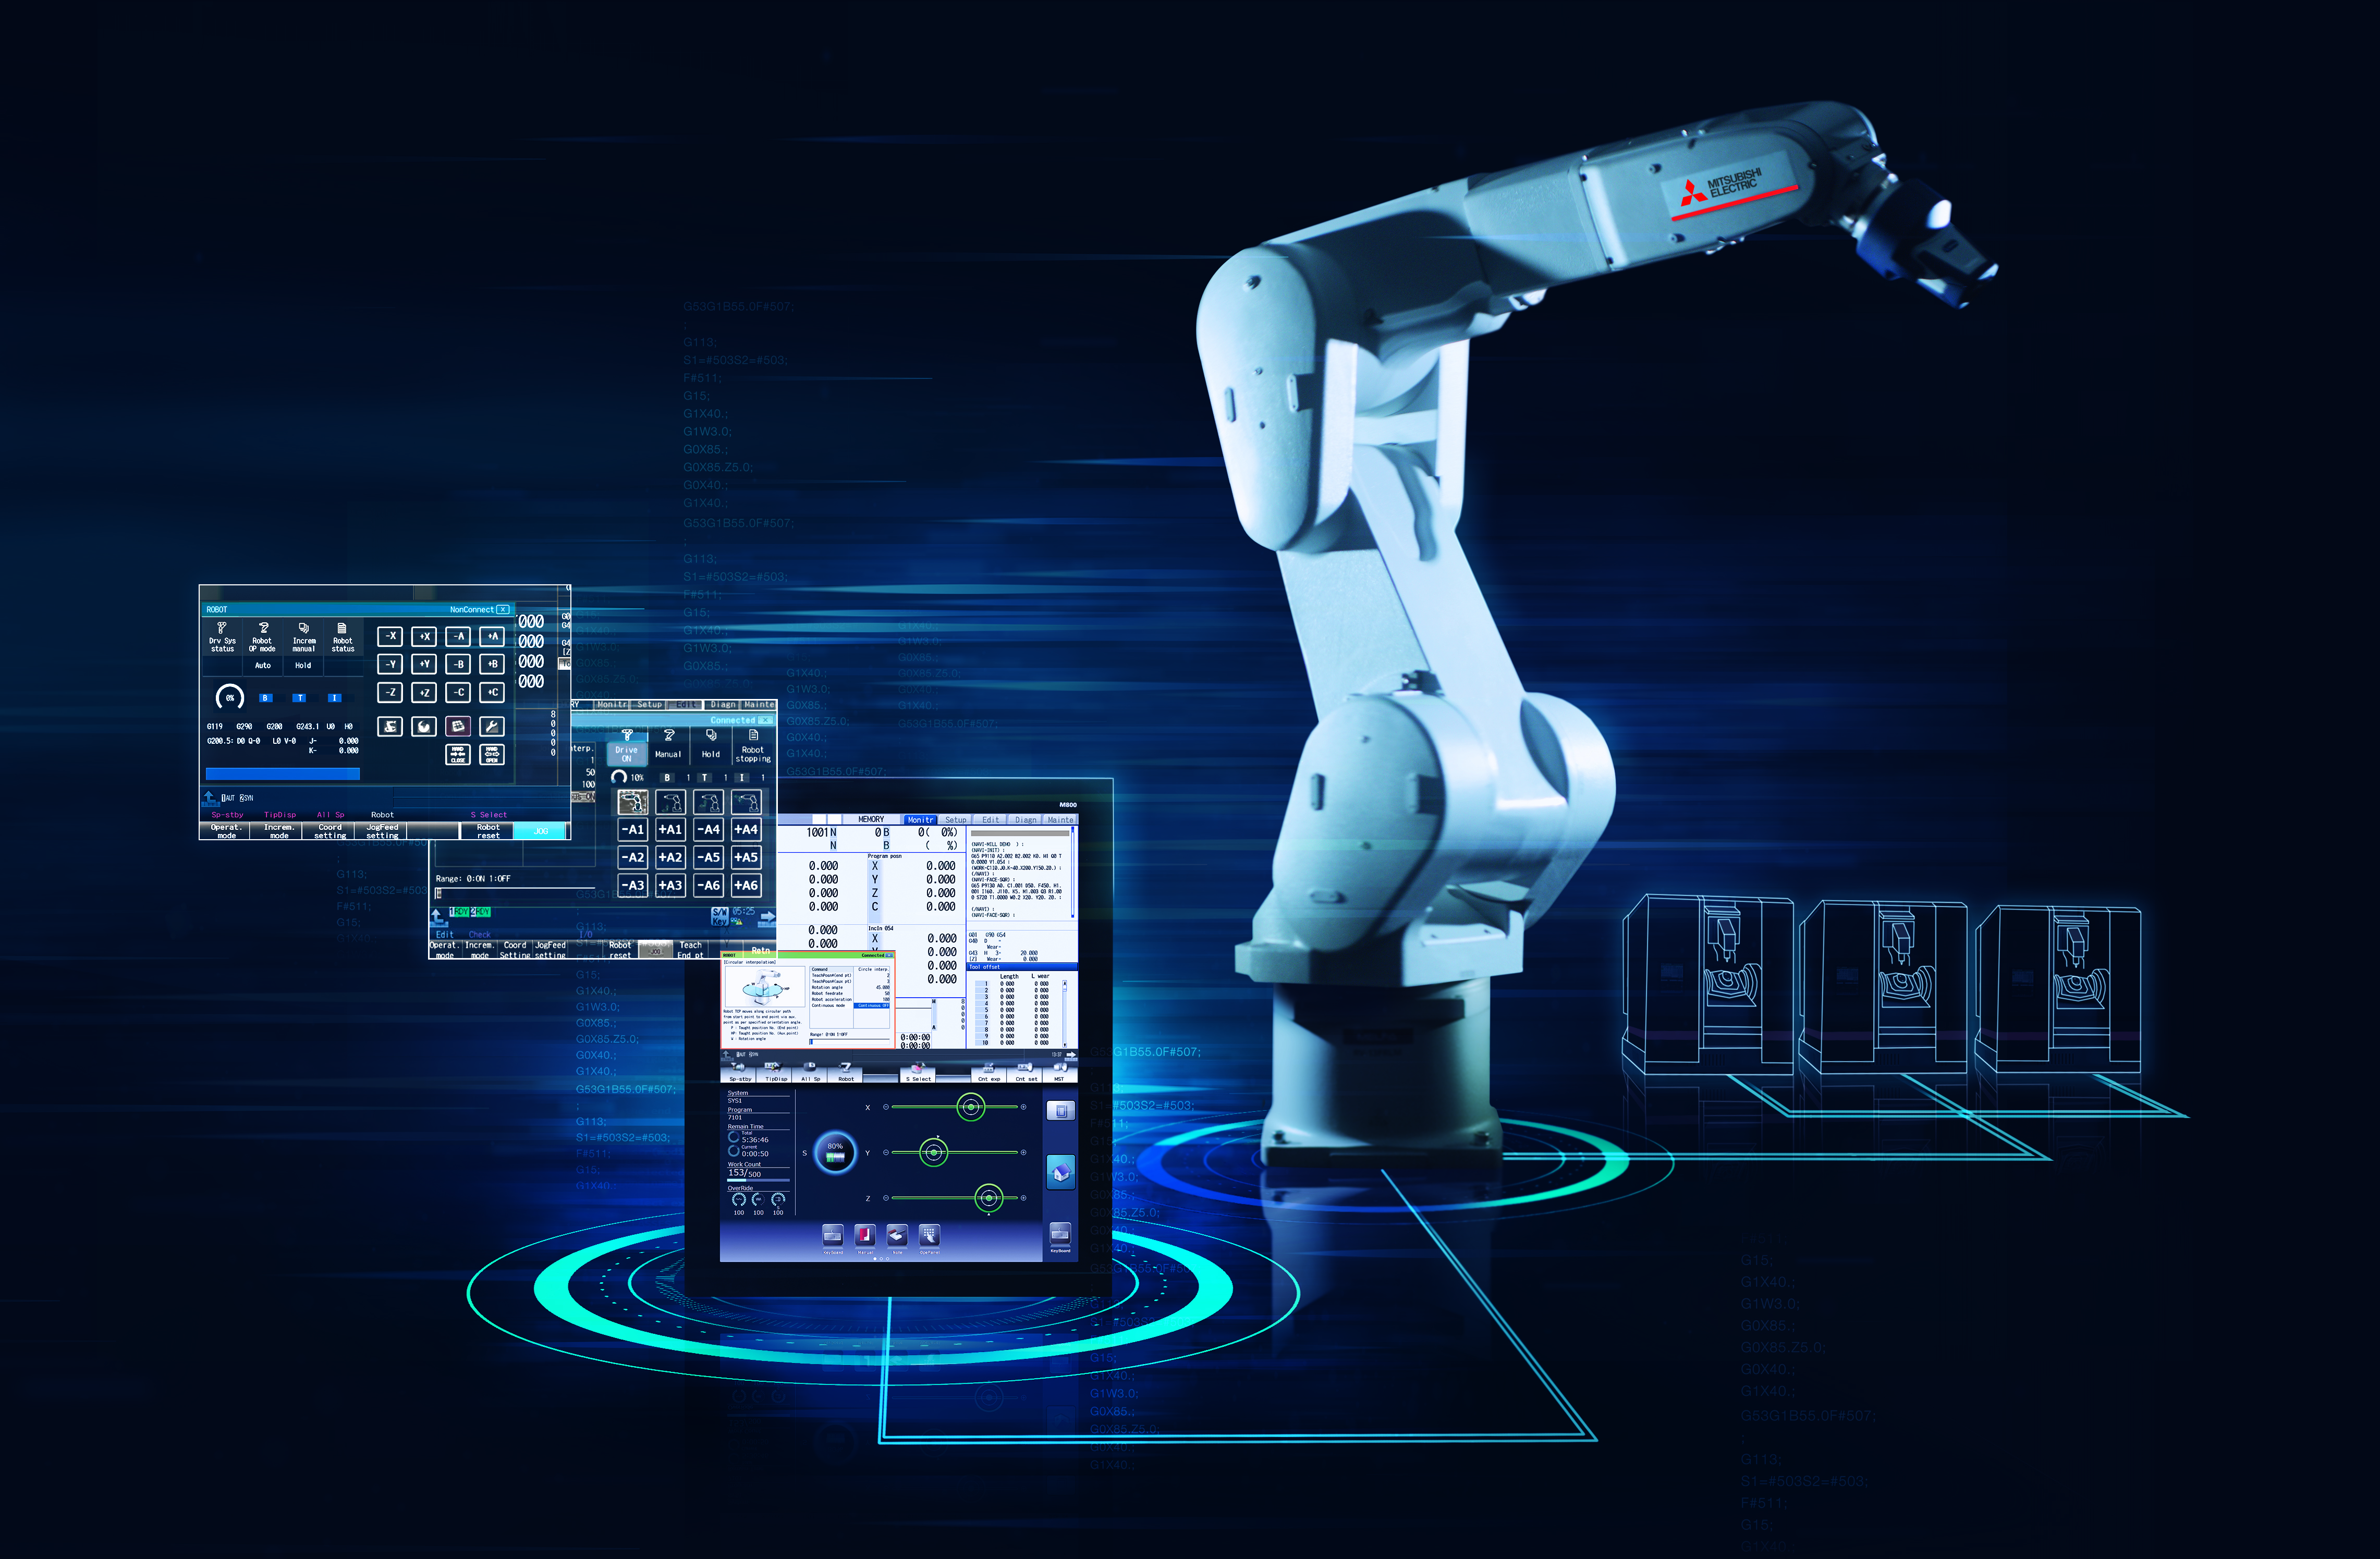 Mitsubishi Electric’s Direct Robot Control (DRC) functionality simplifies the integration of robots in metal forming applications by allowing machine tool operators to program and use robots quickly. [Source: Mitsubishi Electric Europe B.V.]